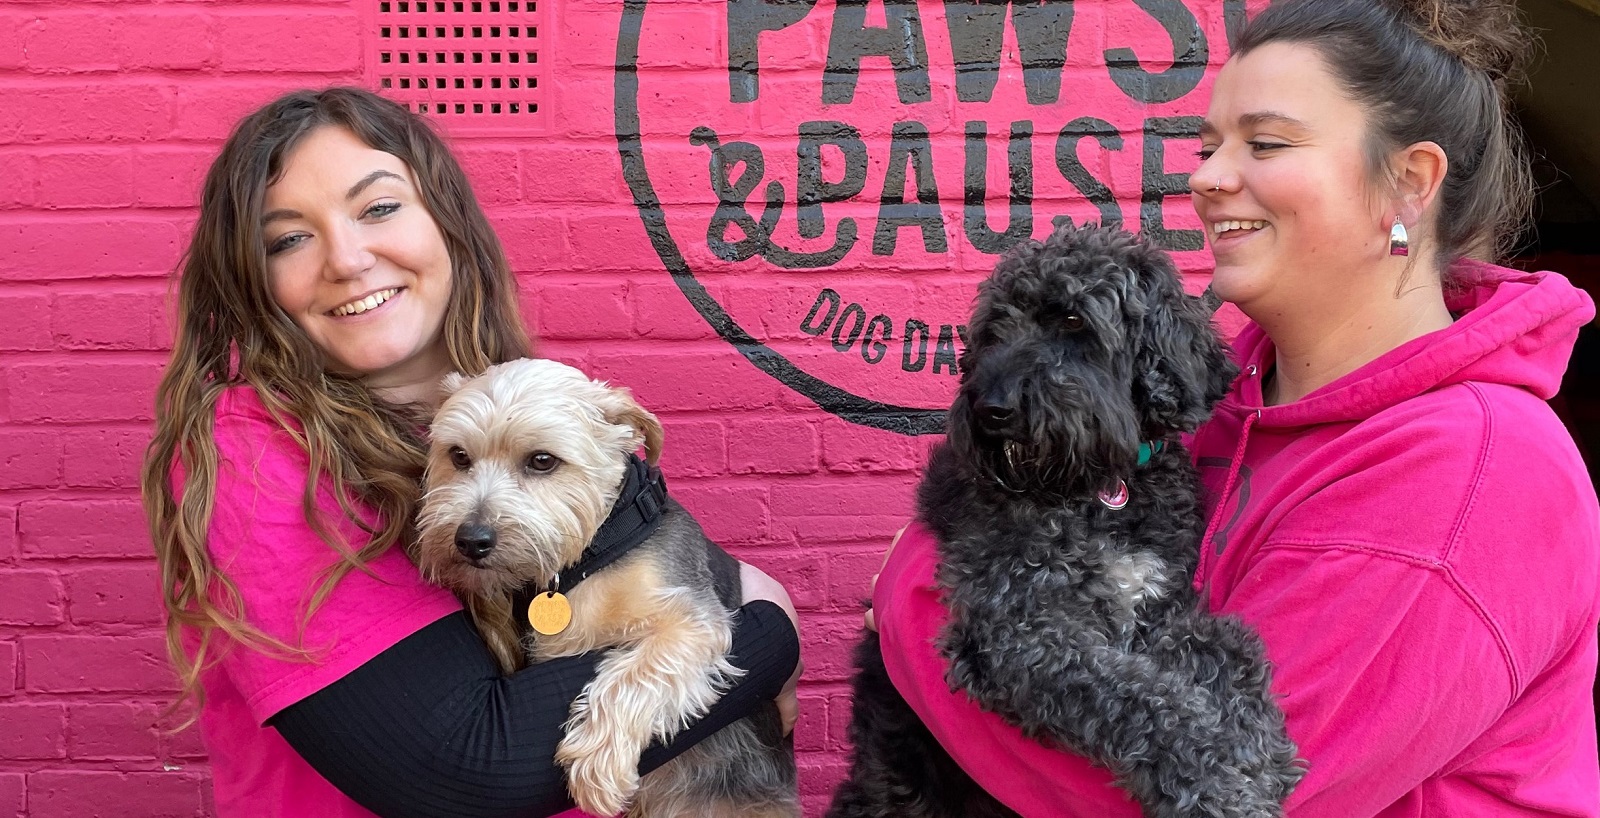 Living Wage employers care for workers – and dogs